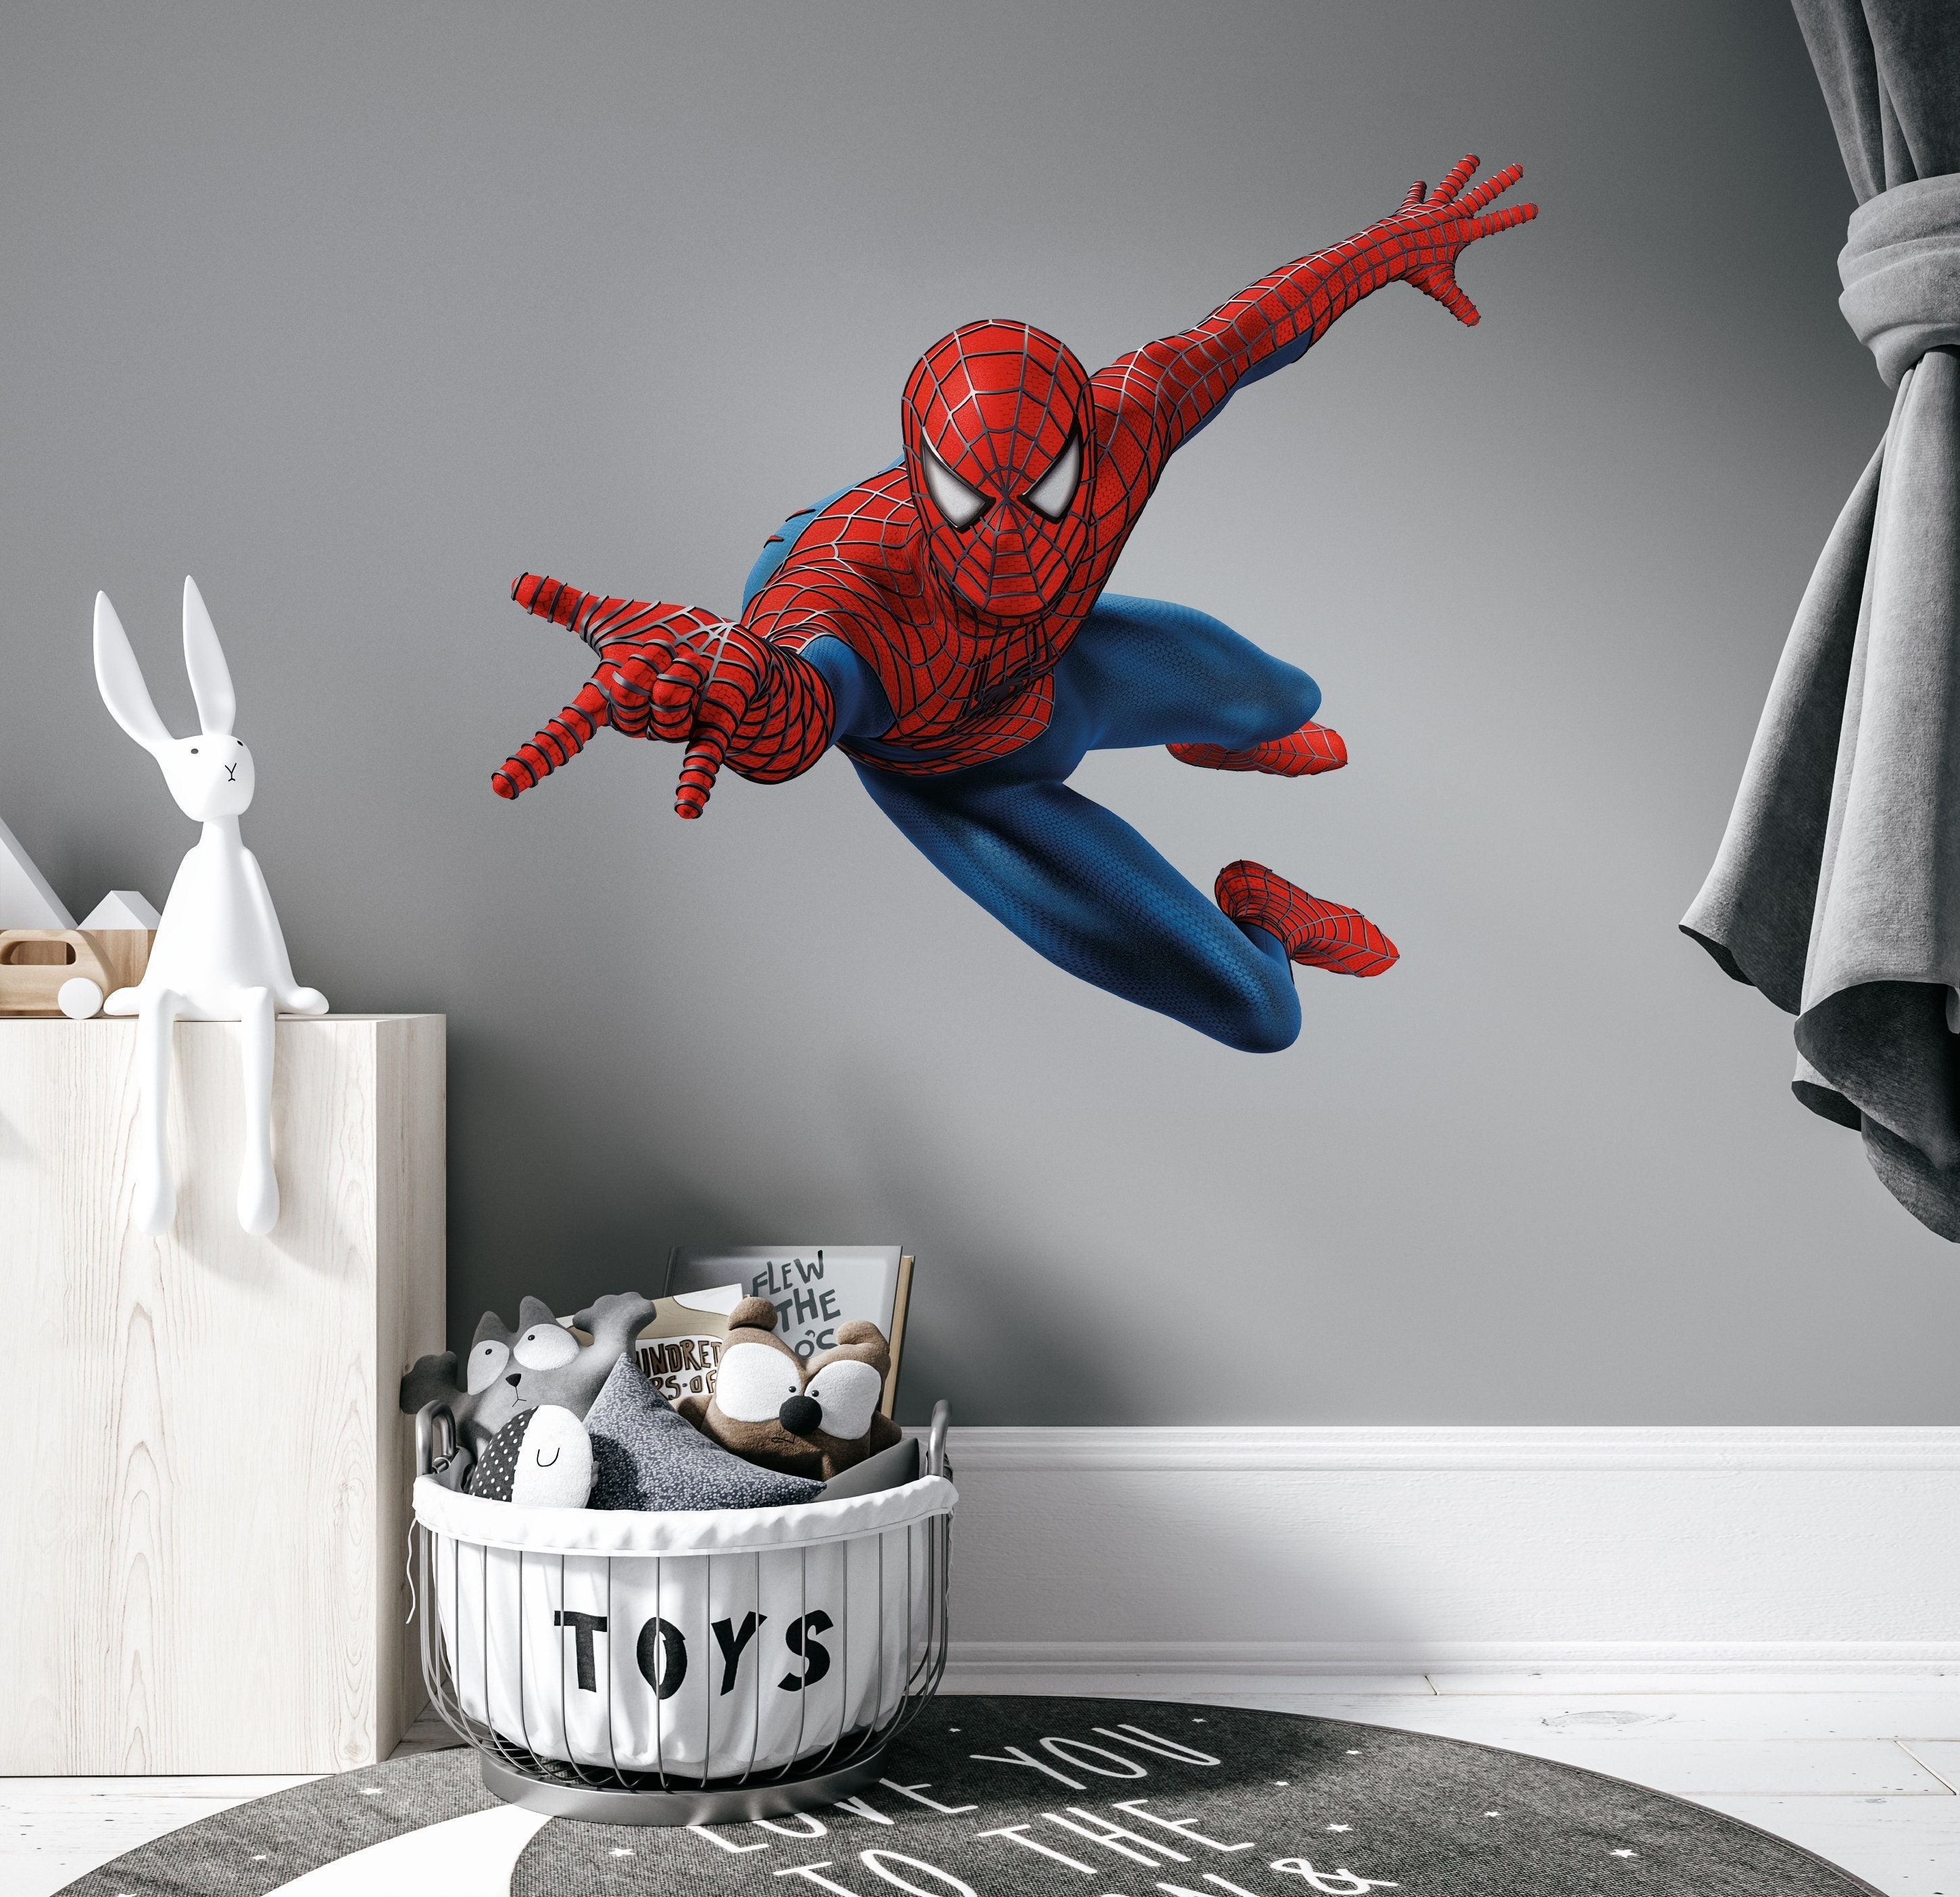 YISKY Mural Spiderman Sticker, Spiderman Stickers Décorations